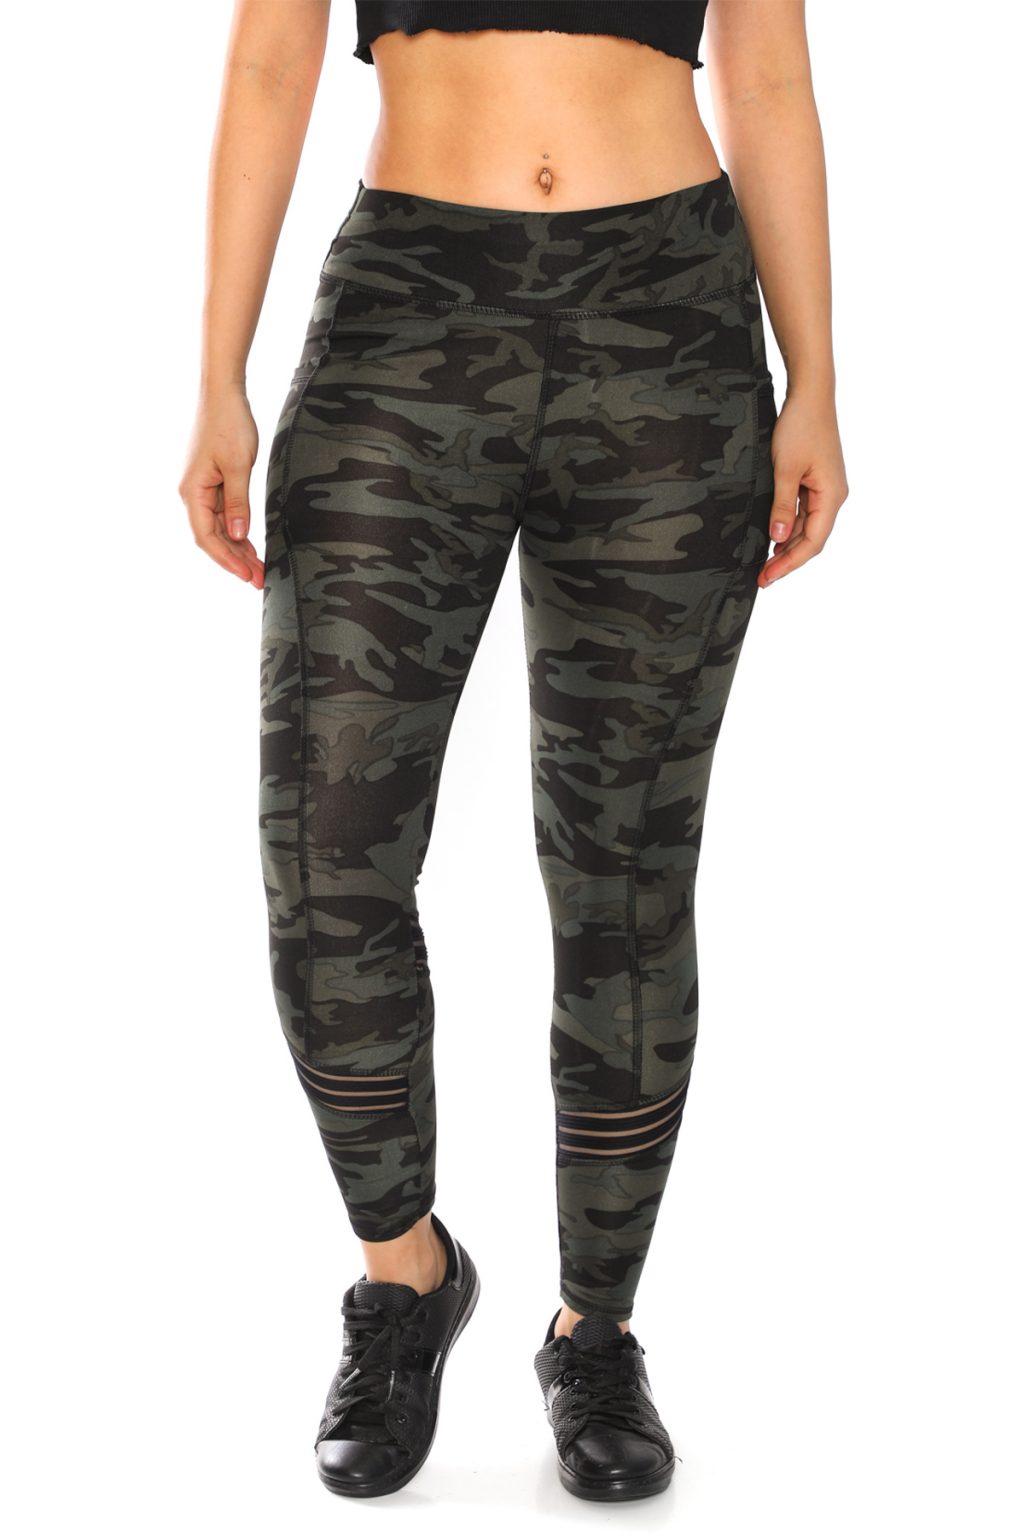 High Waist Leggings with Contrasting Stripes – Camo 2 - Entire Sale